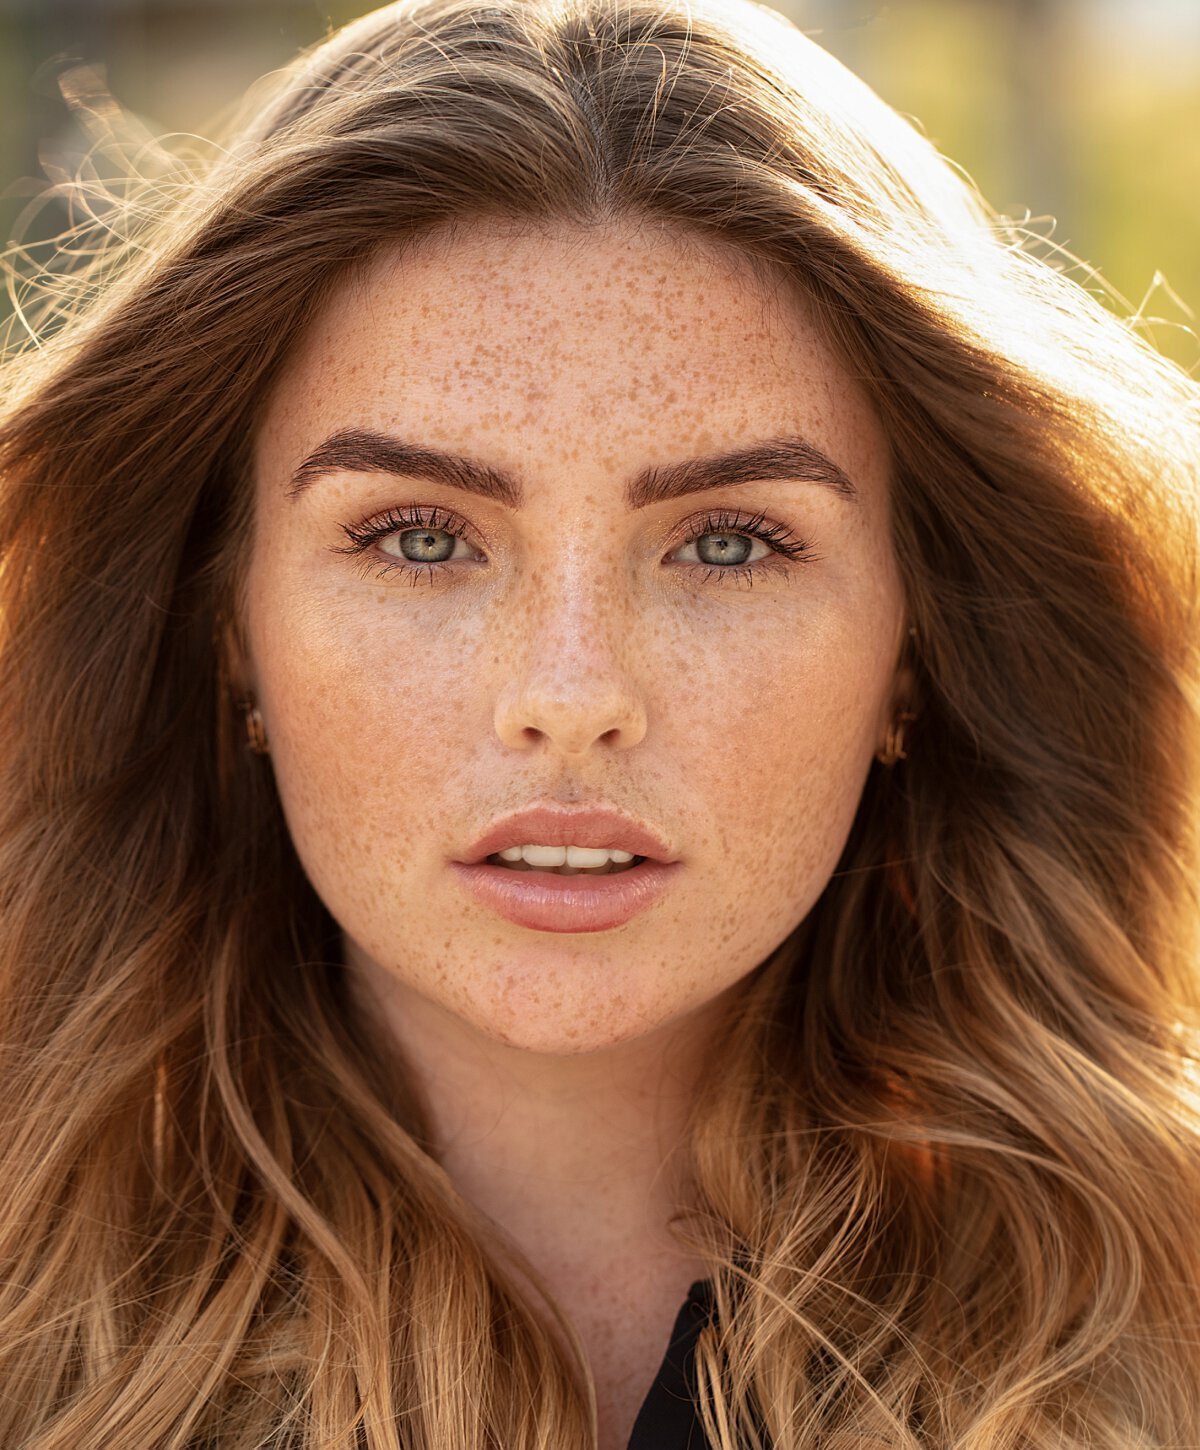 beverly hills botox model with freckles